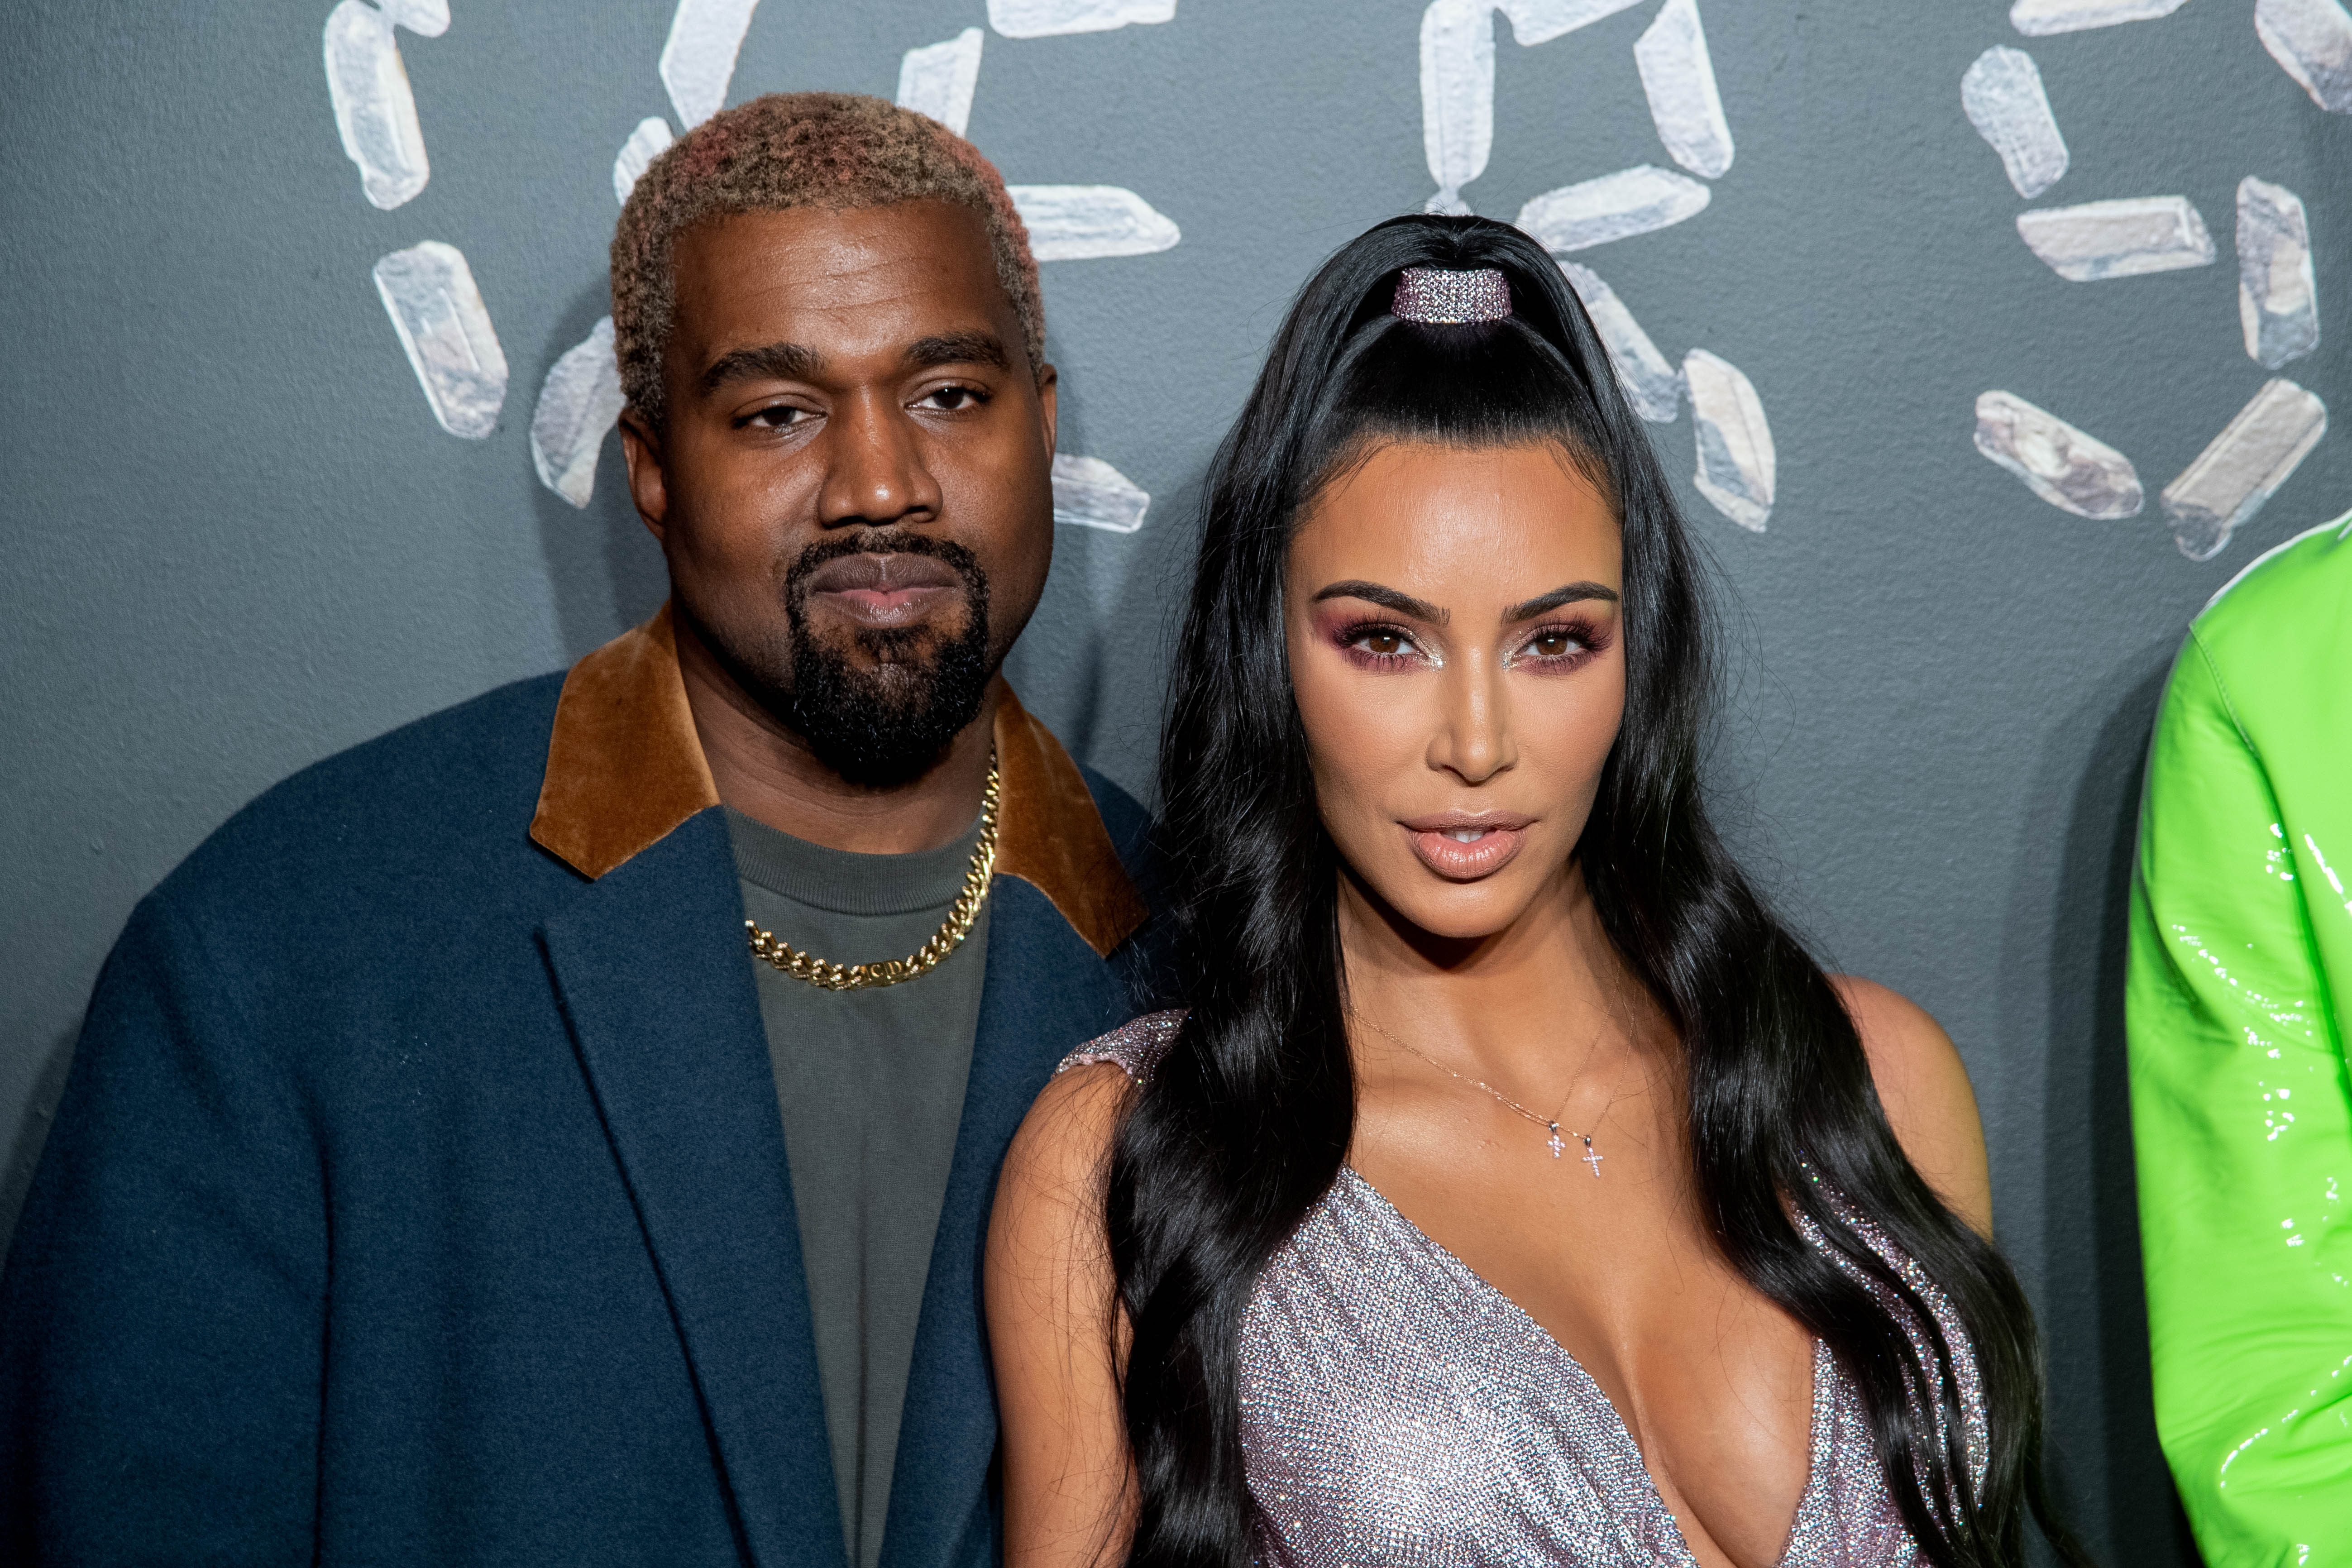 Kanye West and Kim Kardashian West at the the Versace fall 2019 fashion show held at the American Stock Exchange Building in lower Manhattan on December 02, 2018 | Photo: Getty Images